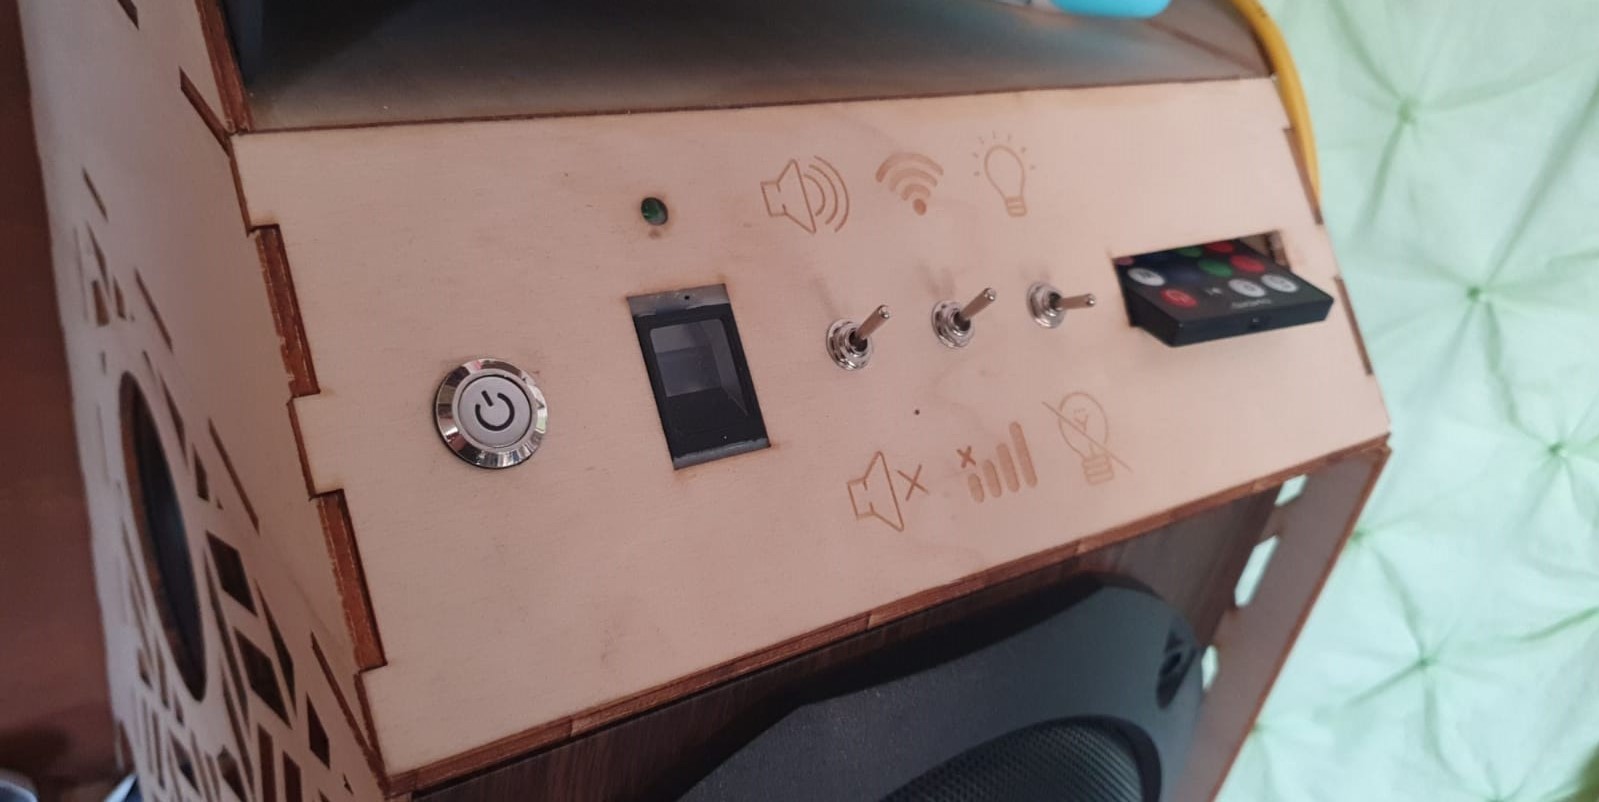 Tinkering Projects - TopDesk Control Box